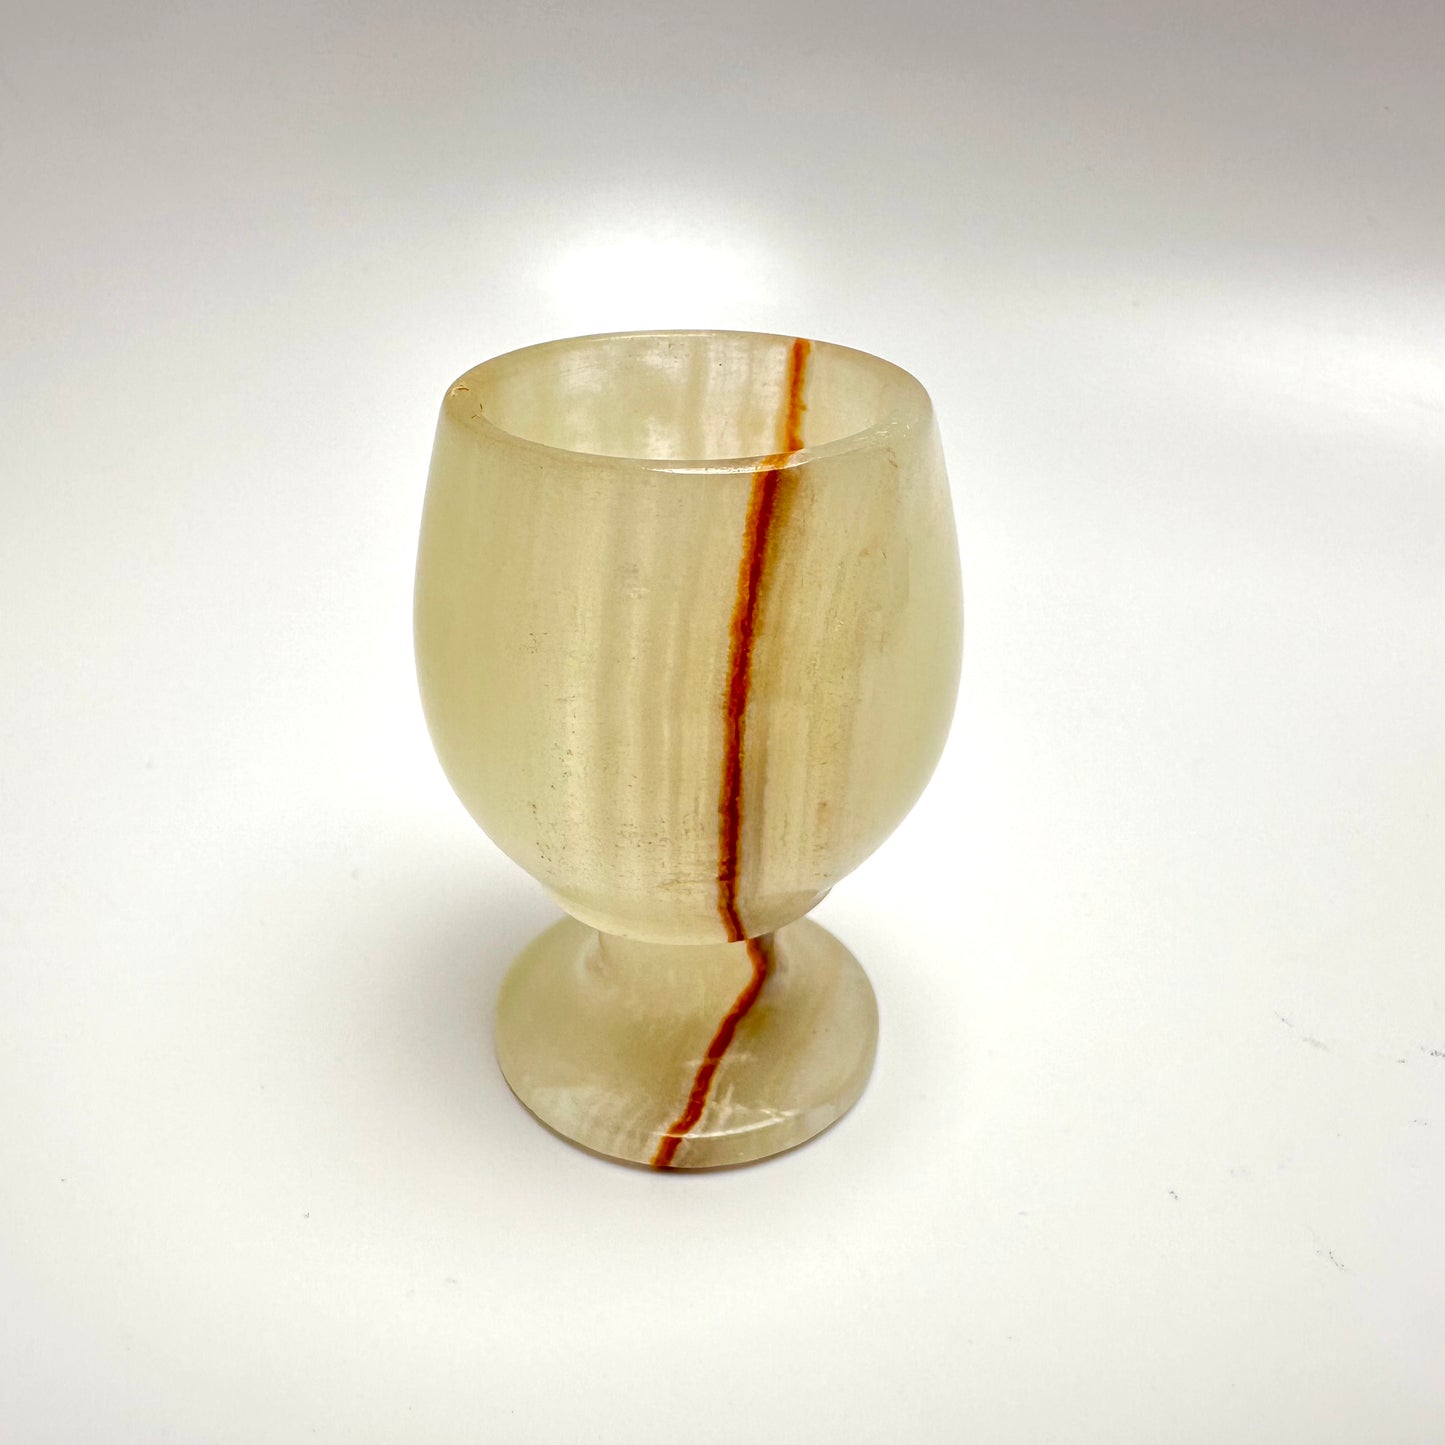 Onyx Sherry Glass Cup-6 Pieces : 2"x 3" - The Harmony Store